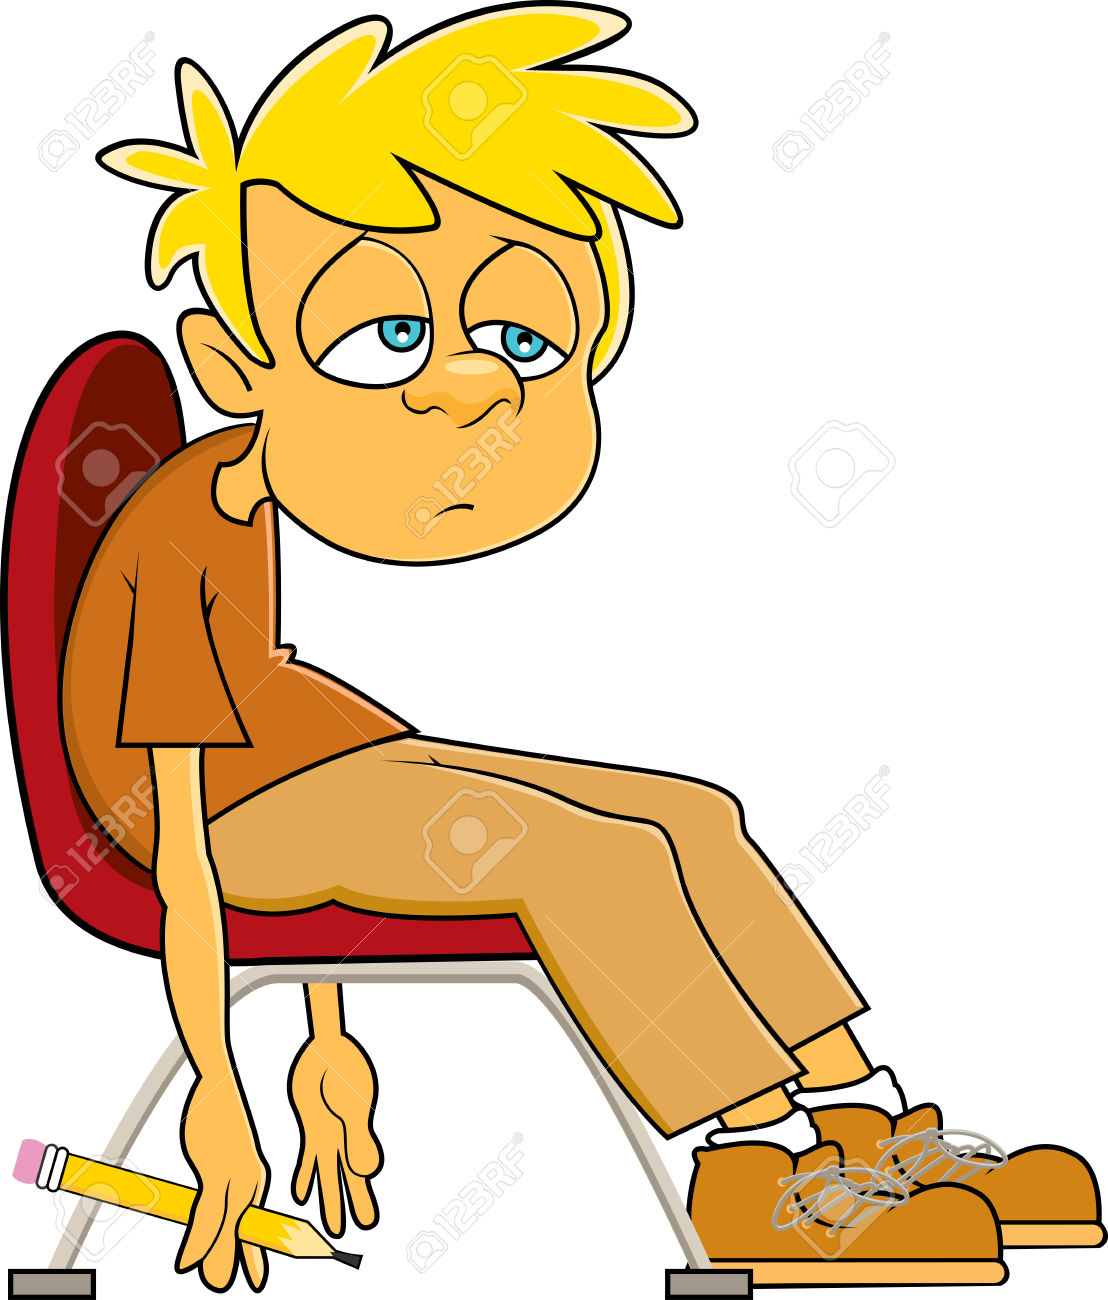 clipart tired - Clipground